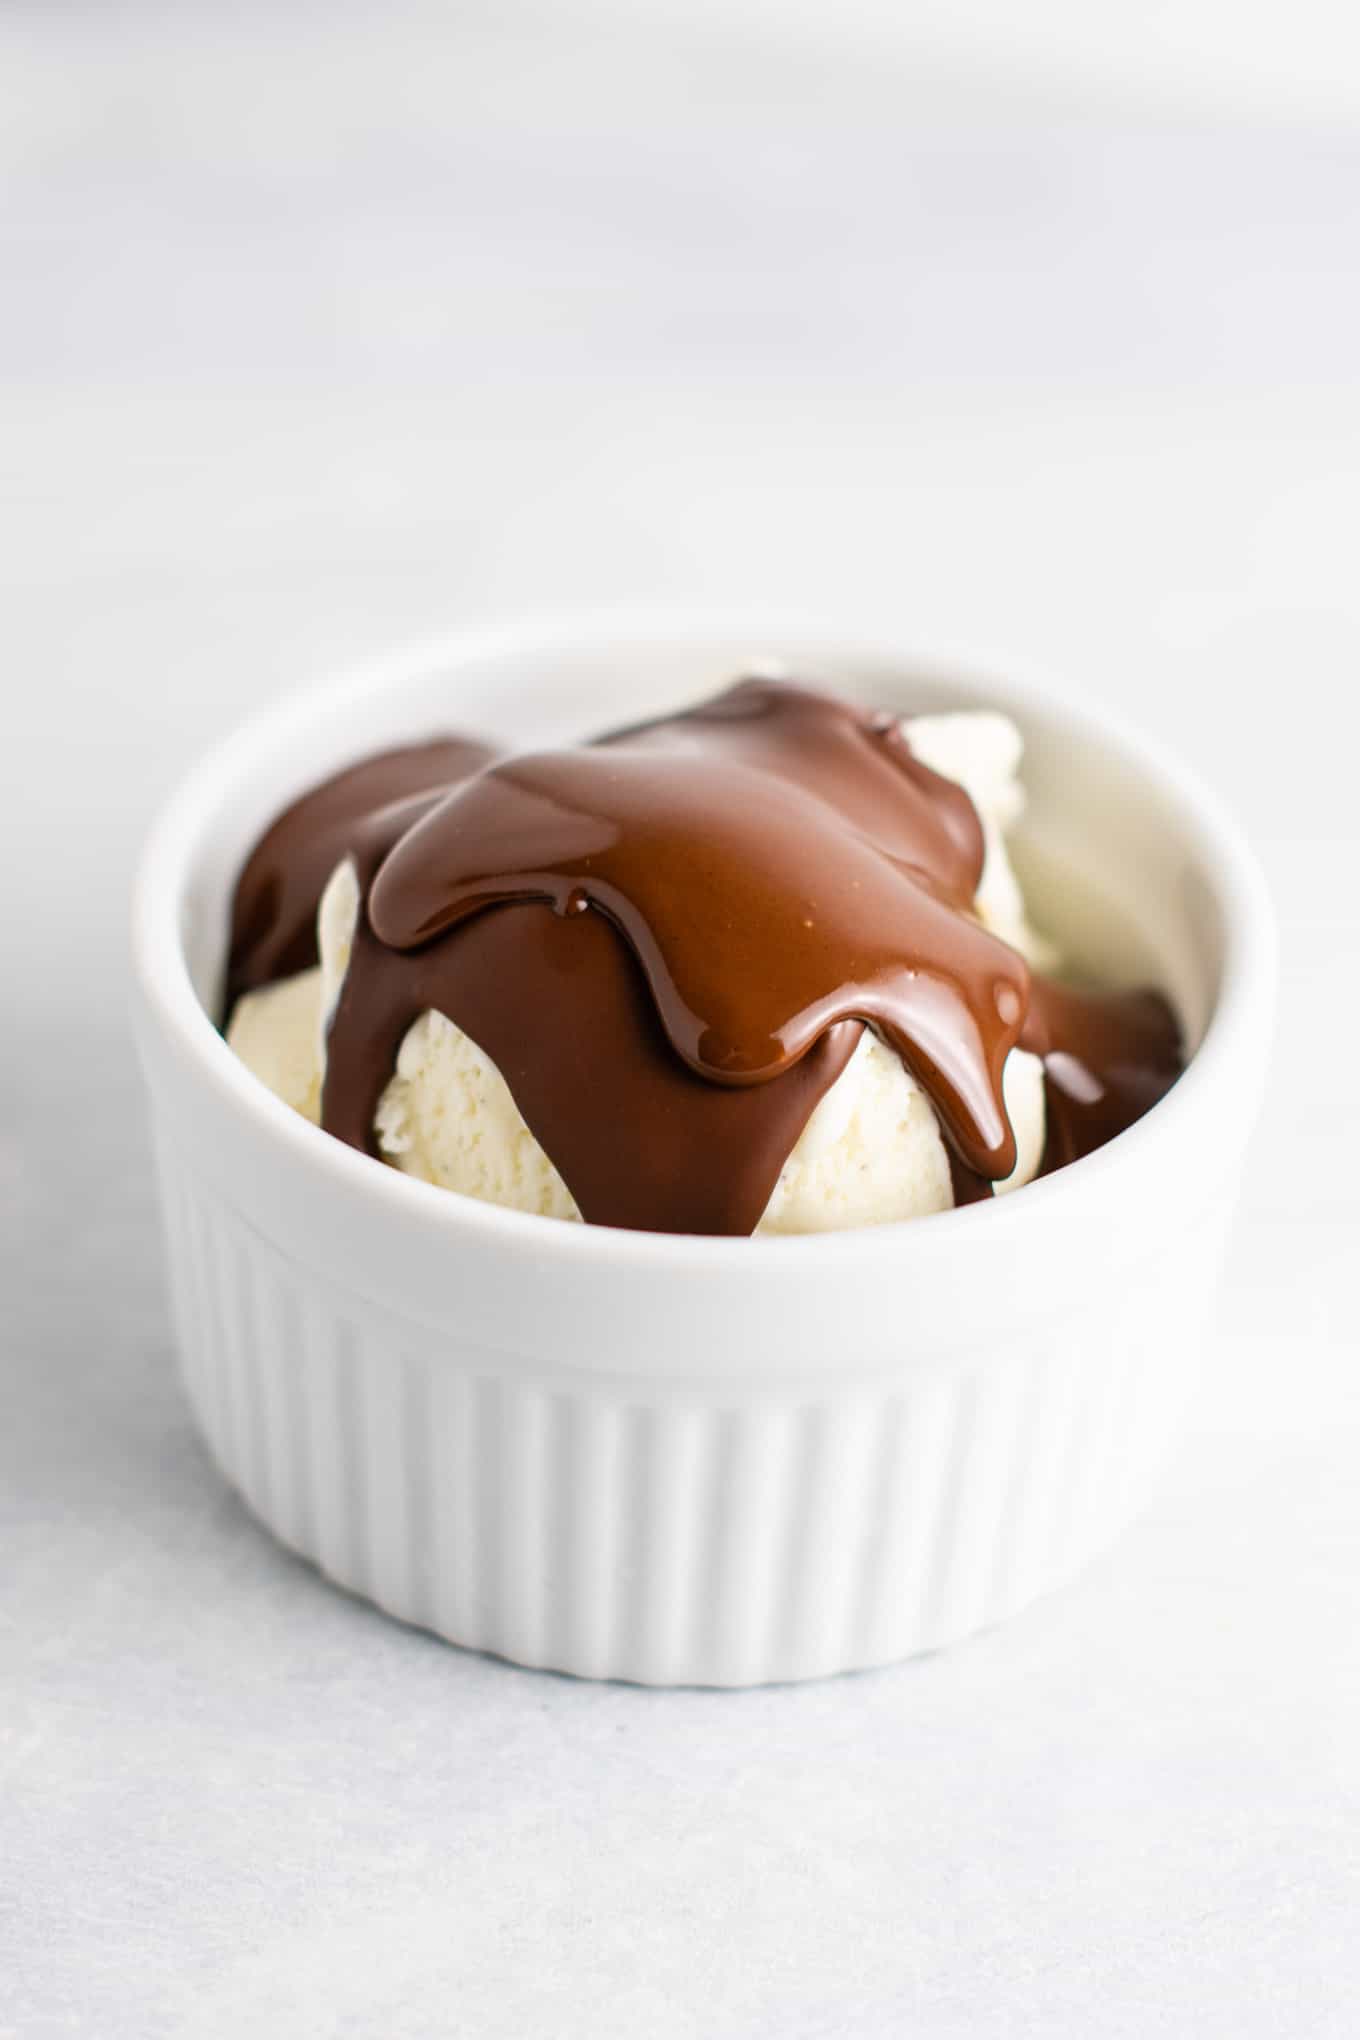 Easy dessert shell made with just 3 ingredients. Pour over your favorite ice cream for a special treat!